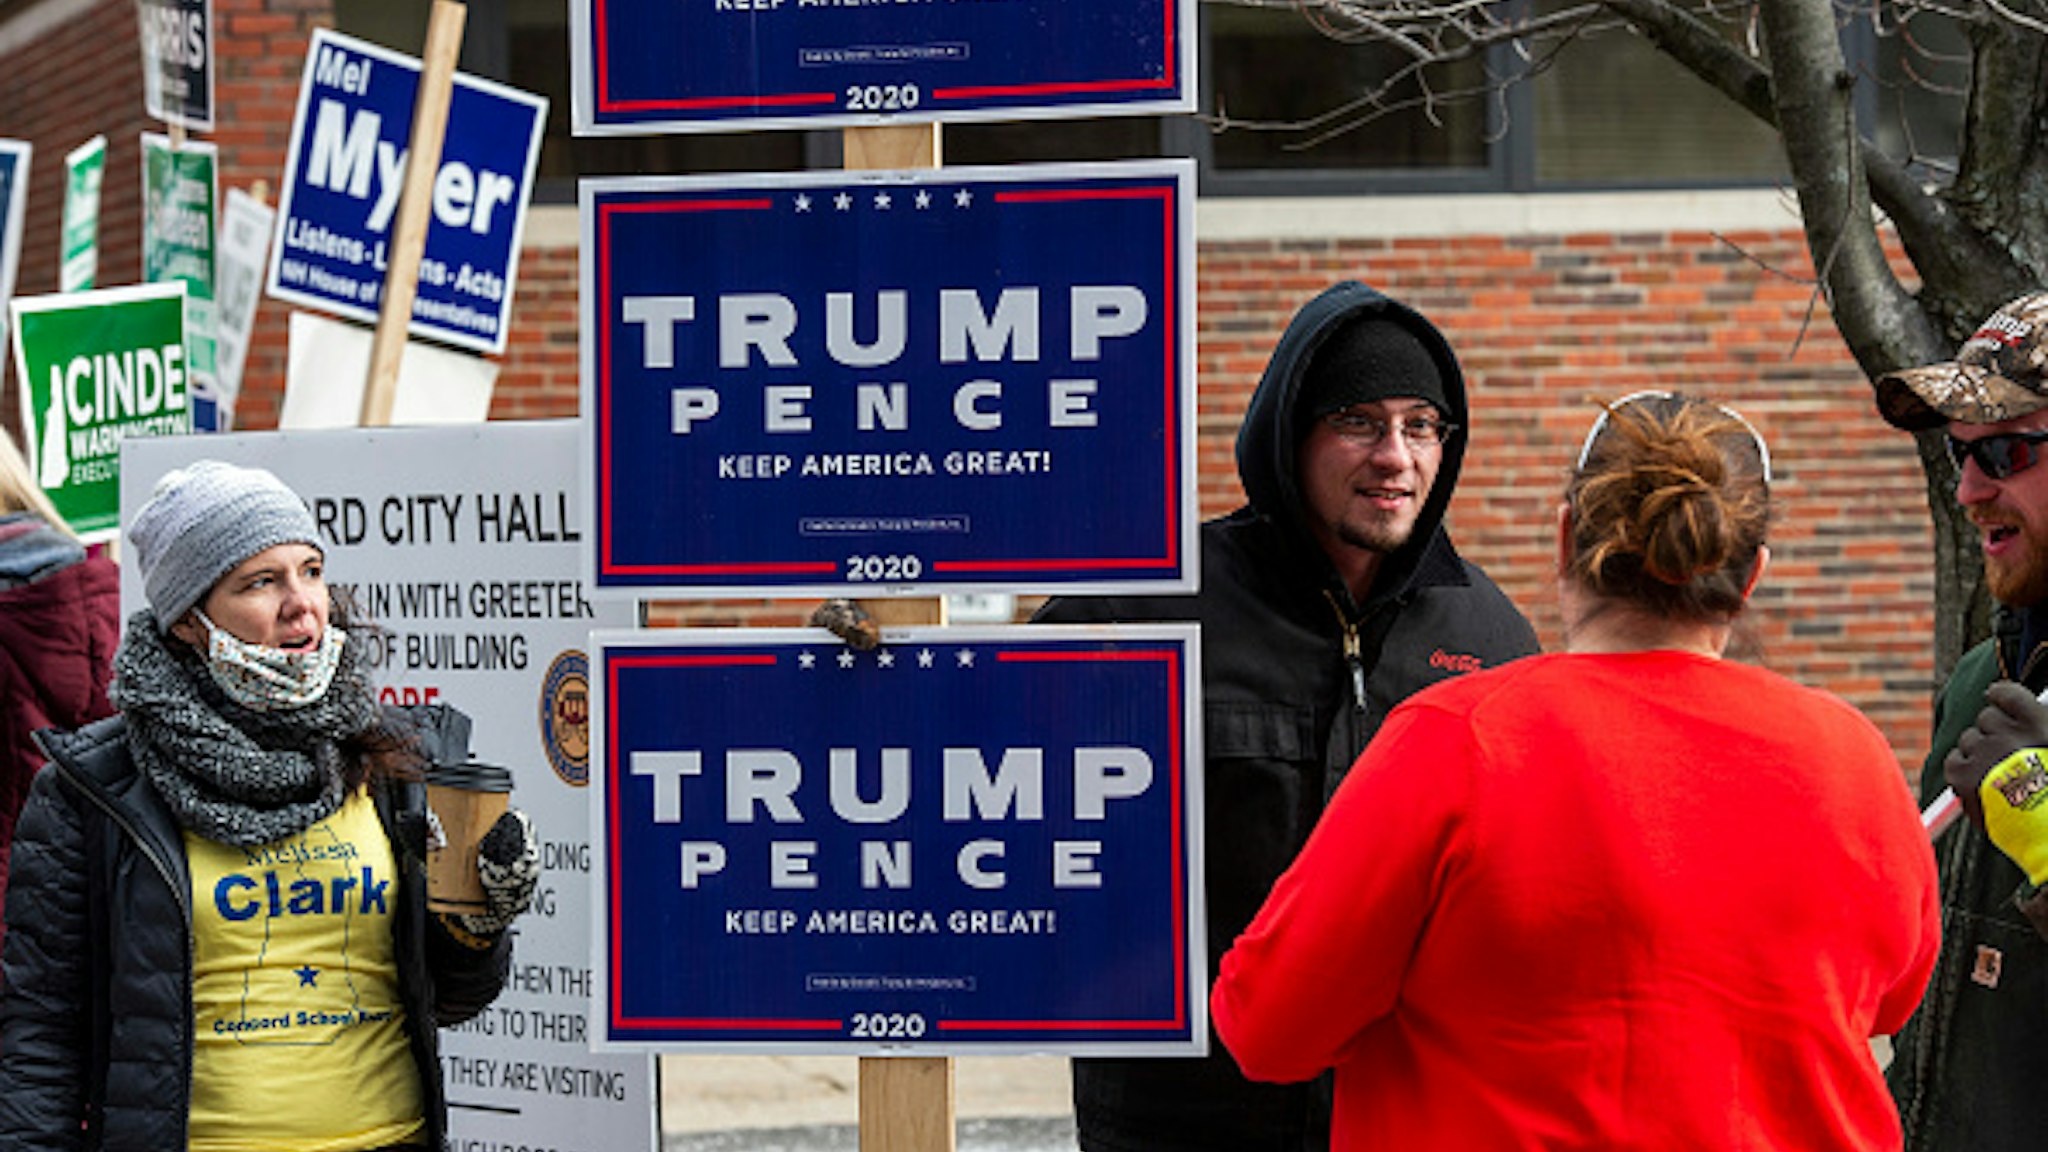 A woman brings coffee to sign holders outside a polling station on Election Day in Concord, New Hampshire on November 3, 2020. - Americans were voting on Tuesday under the shadow of a surging coronavirus pandemic to decide whether to reelect Republican Donald Trump, one of the most polarizing presidents in US history, or send Democrat Joe Biden to the White House